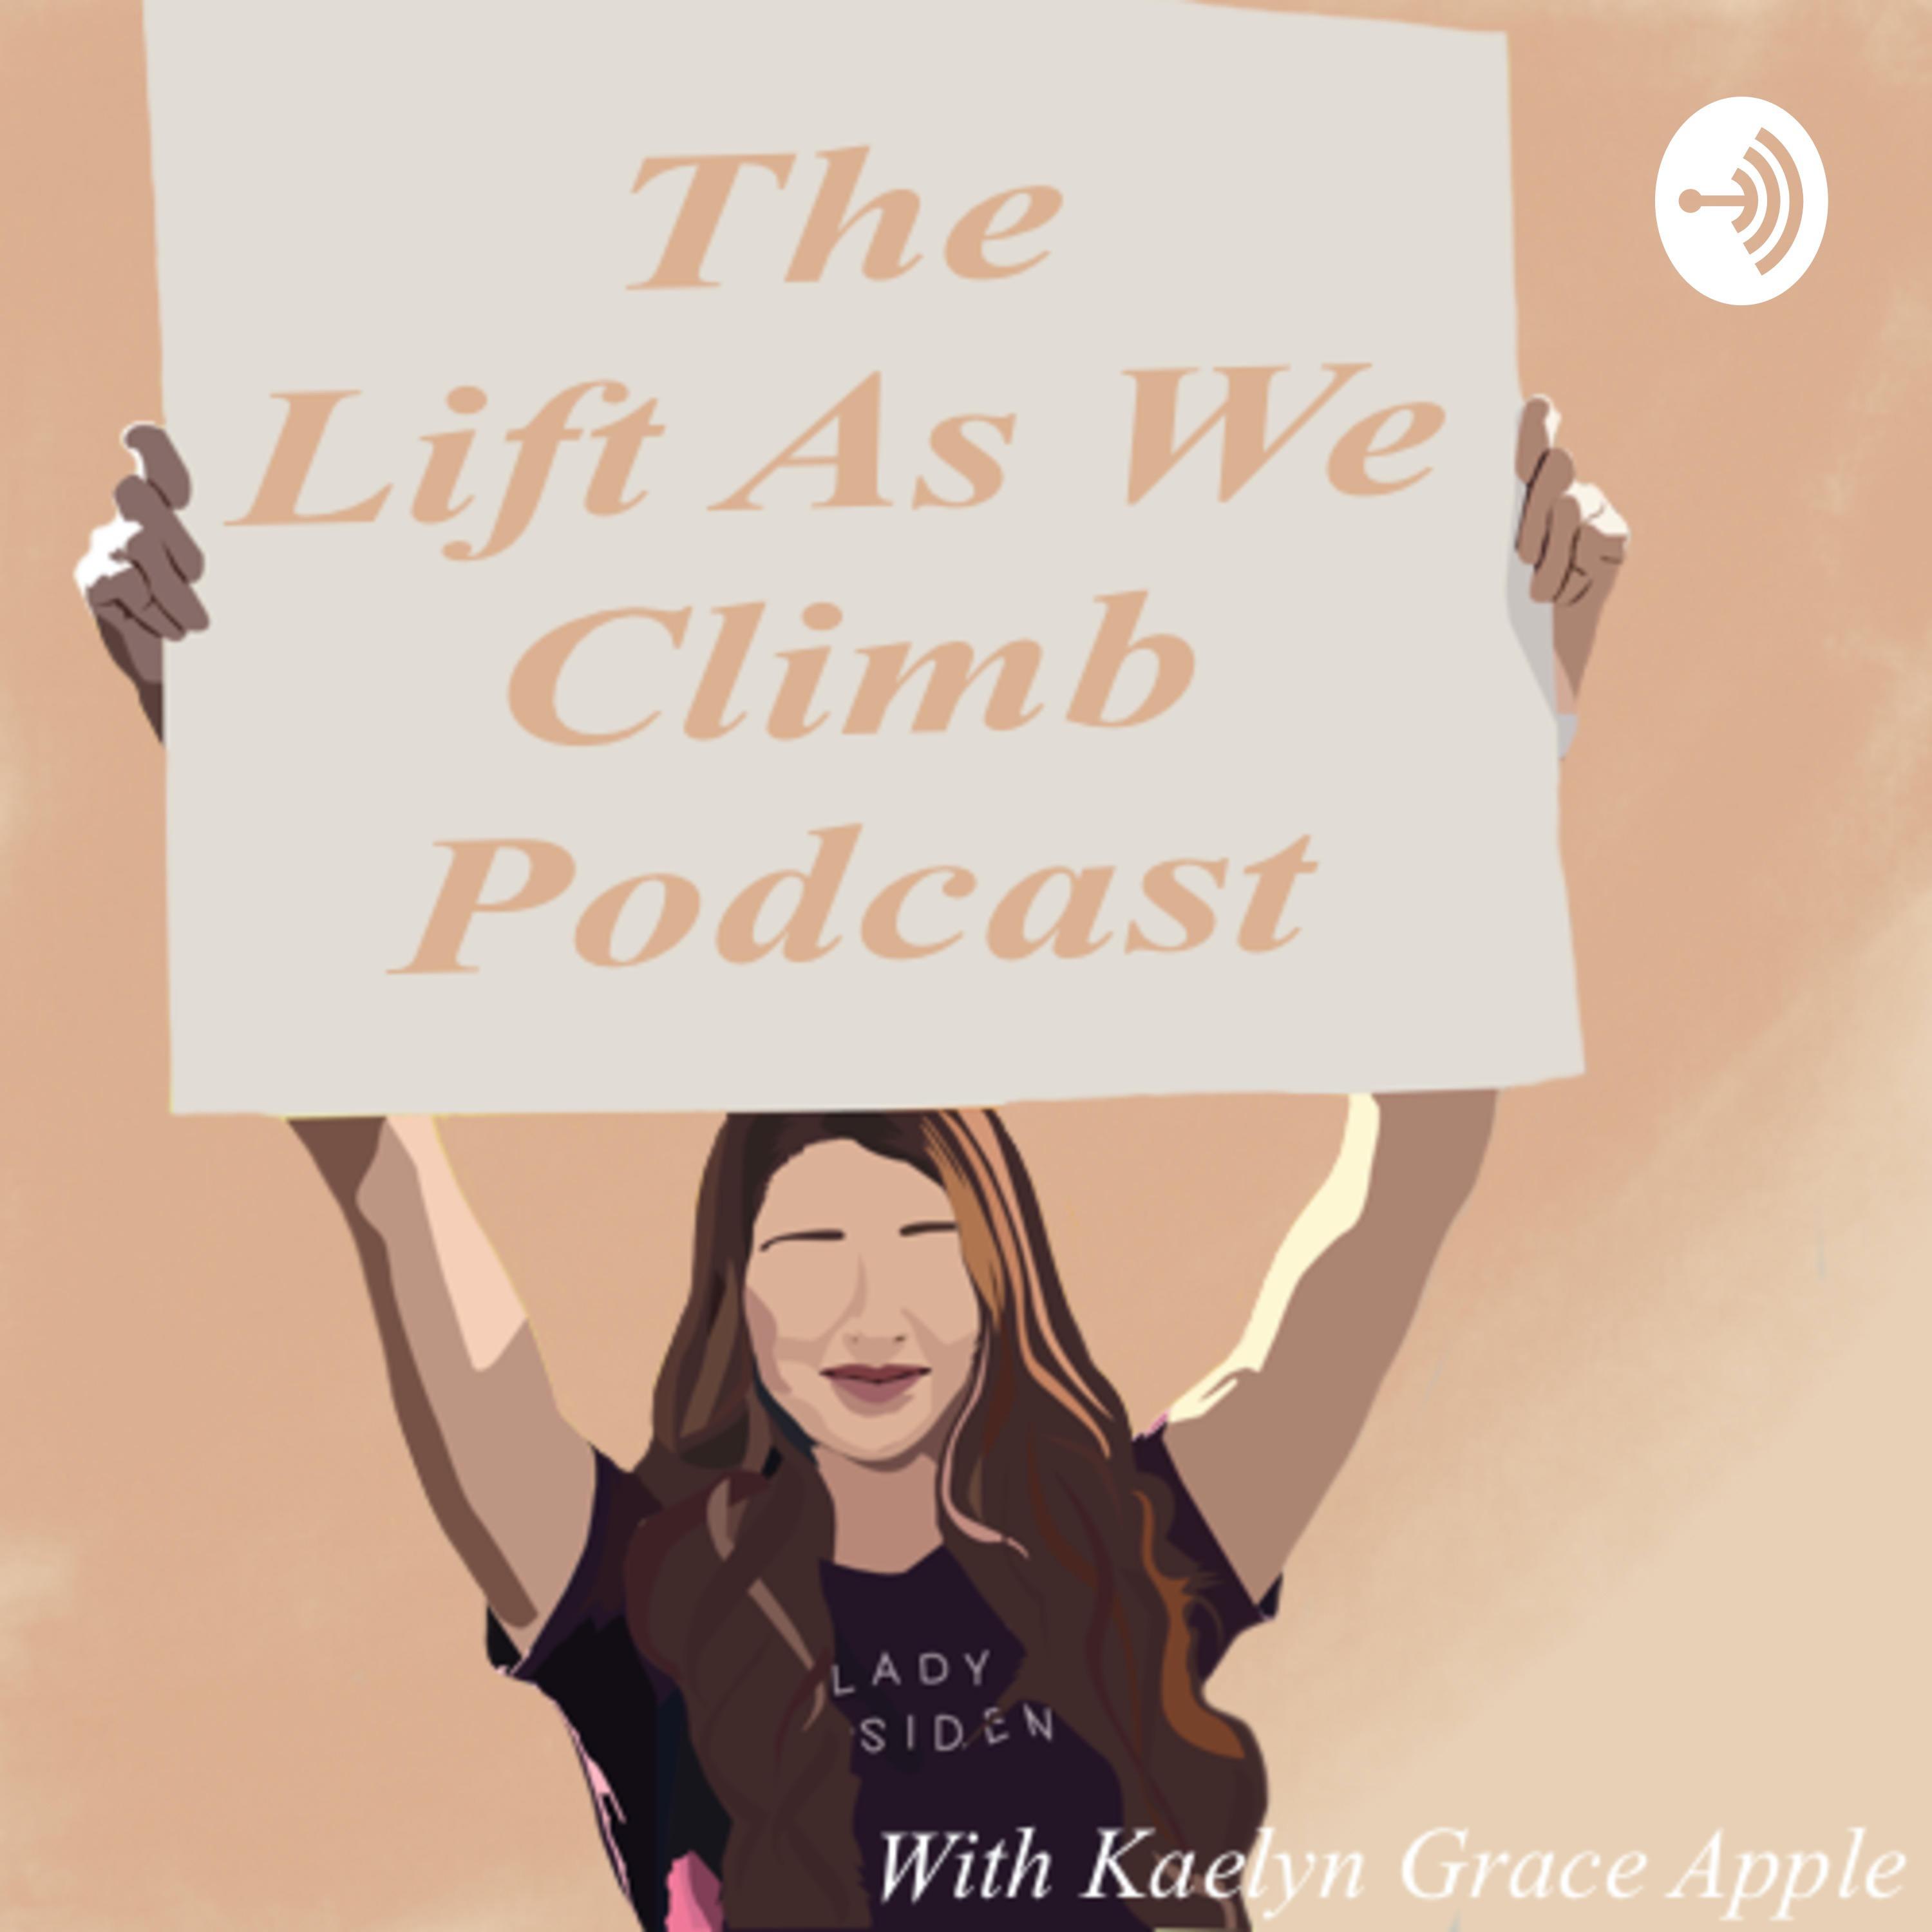 The Lift As We Climb Podcast